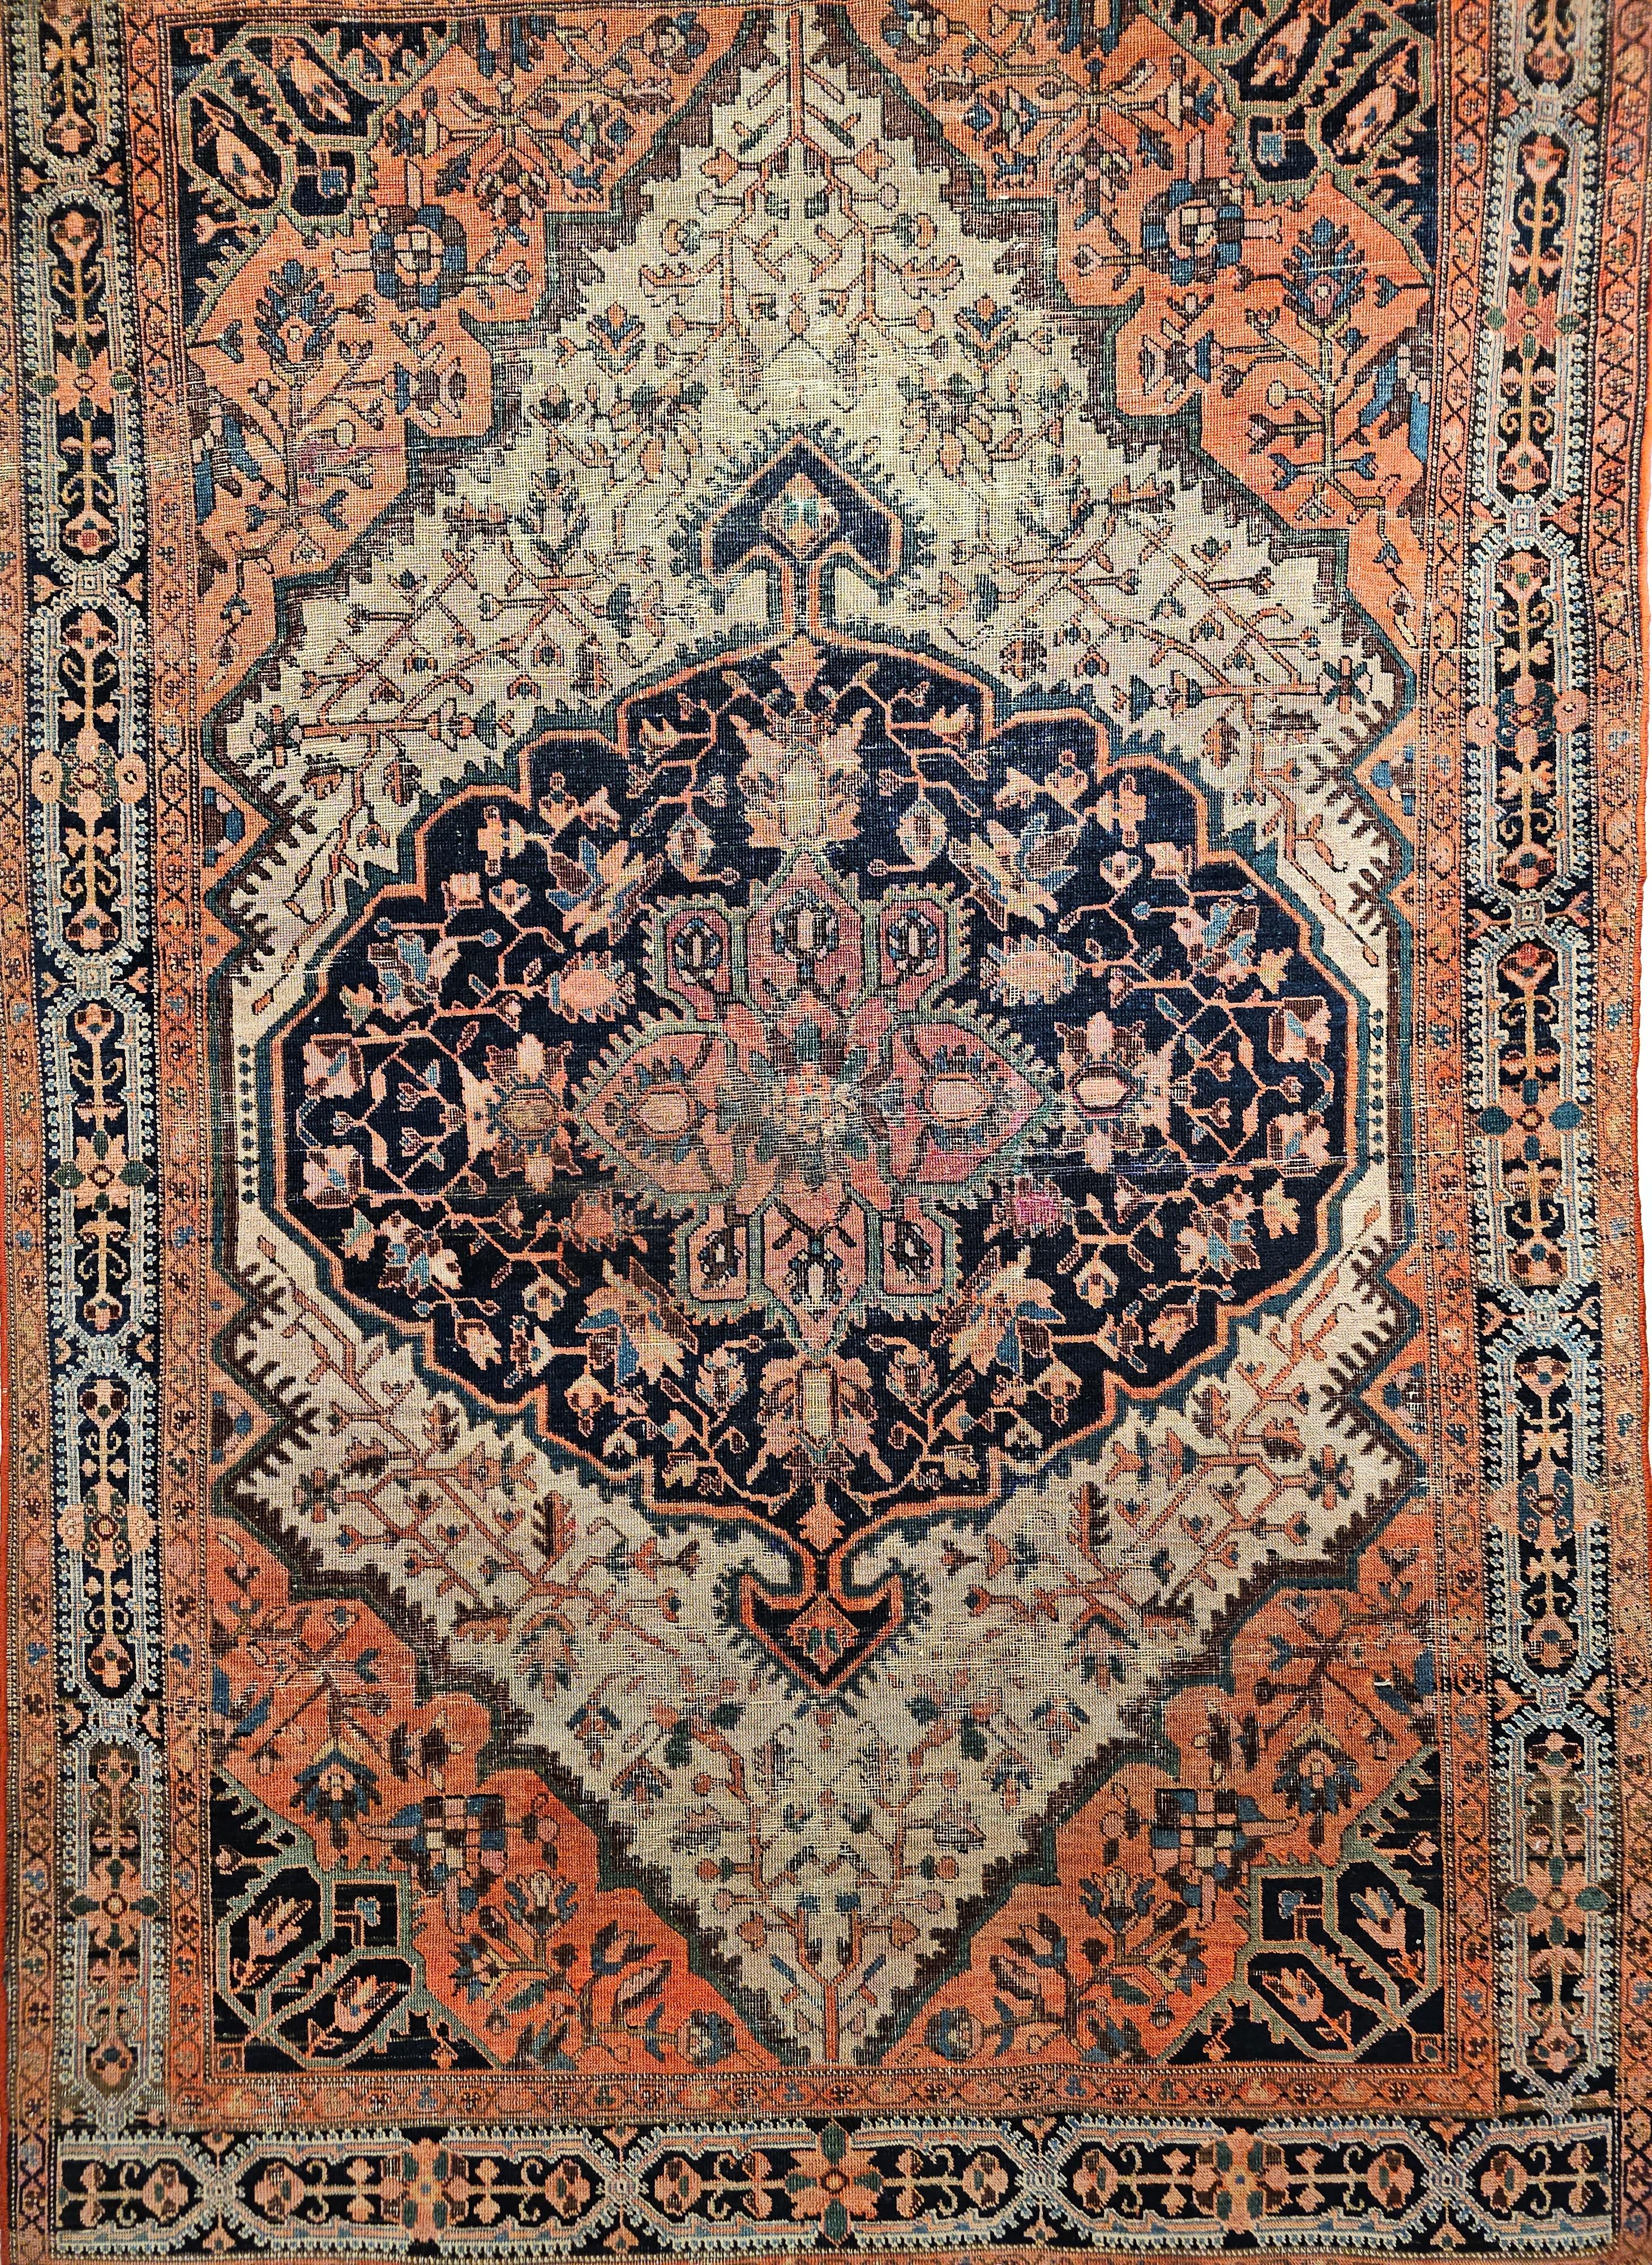 A beautiful Persian Farahan Sarouk area rug in a medallion floral pattern in navy blue, terracotta Red, and camel colors from the late 1800s.  The overall design of the rug is very grand with a very unusual medallion design.  The rug has a camel